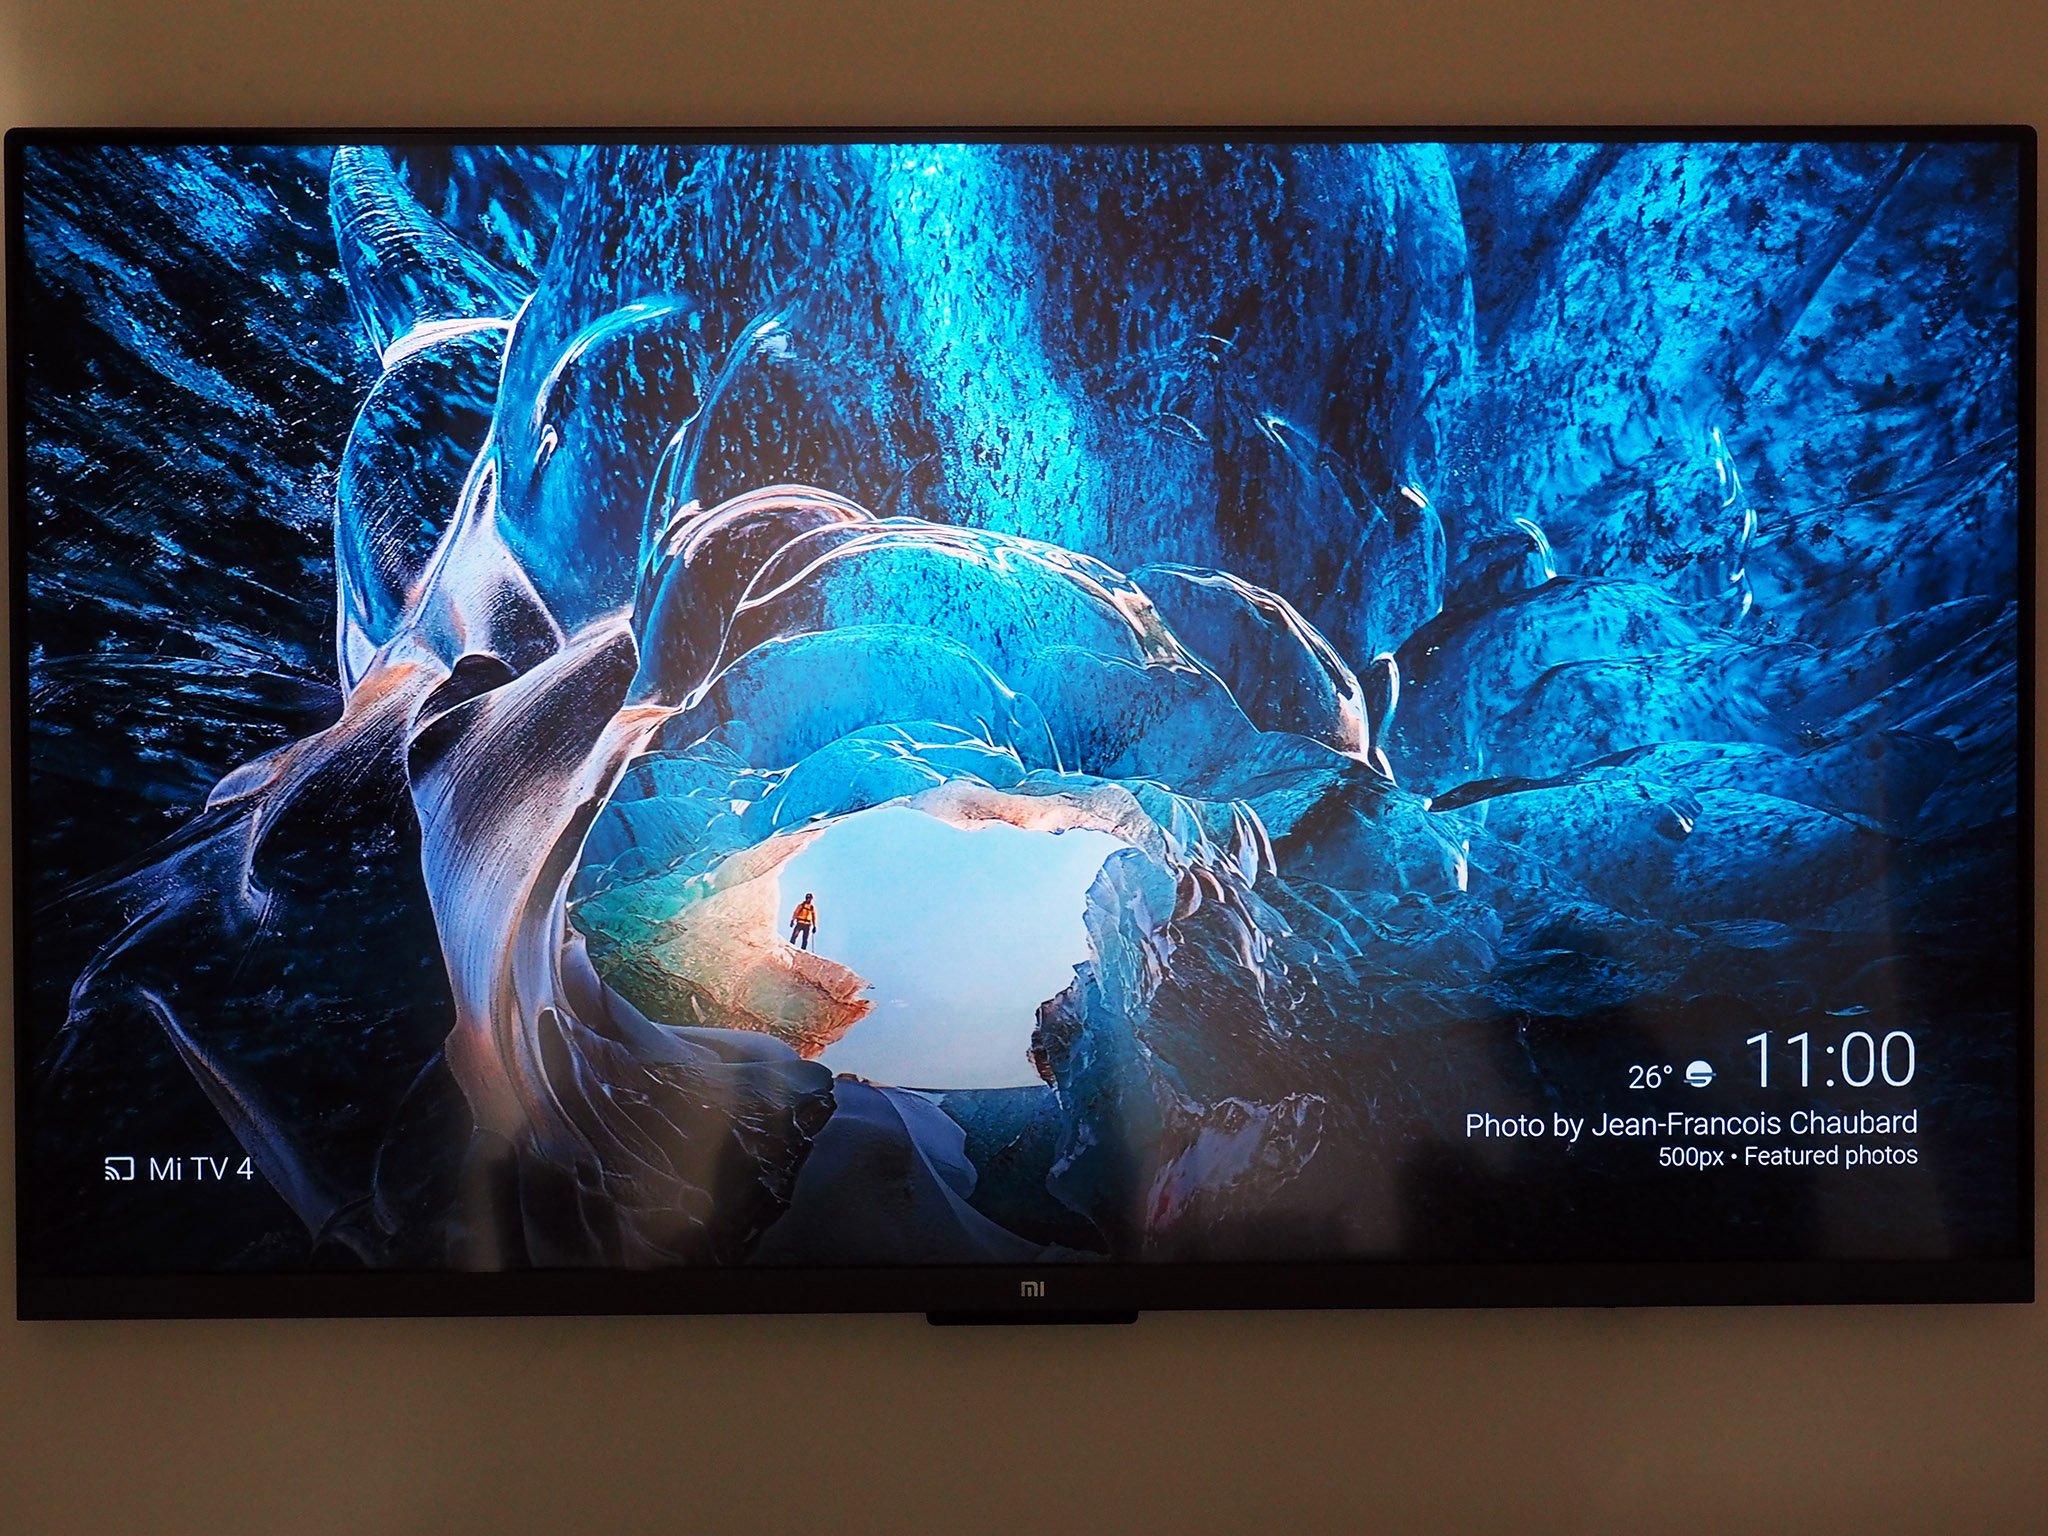 Xiaomi Mi LED Smart TV [Review]: The best budget 4K TV you can buy